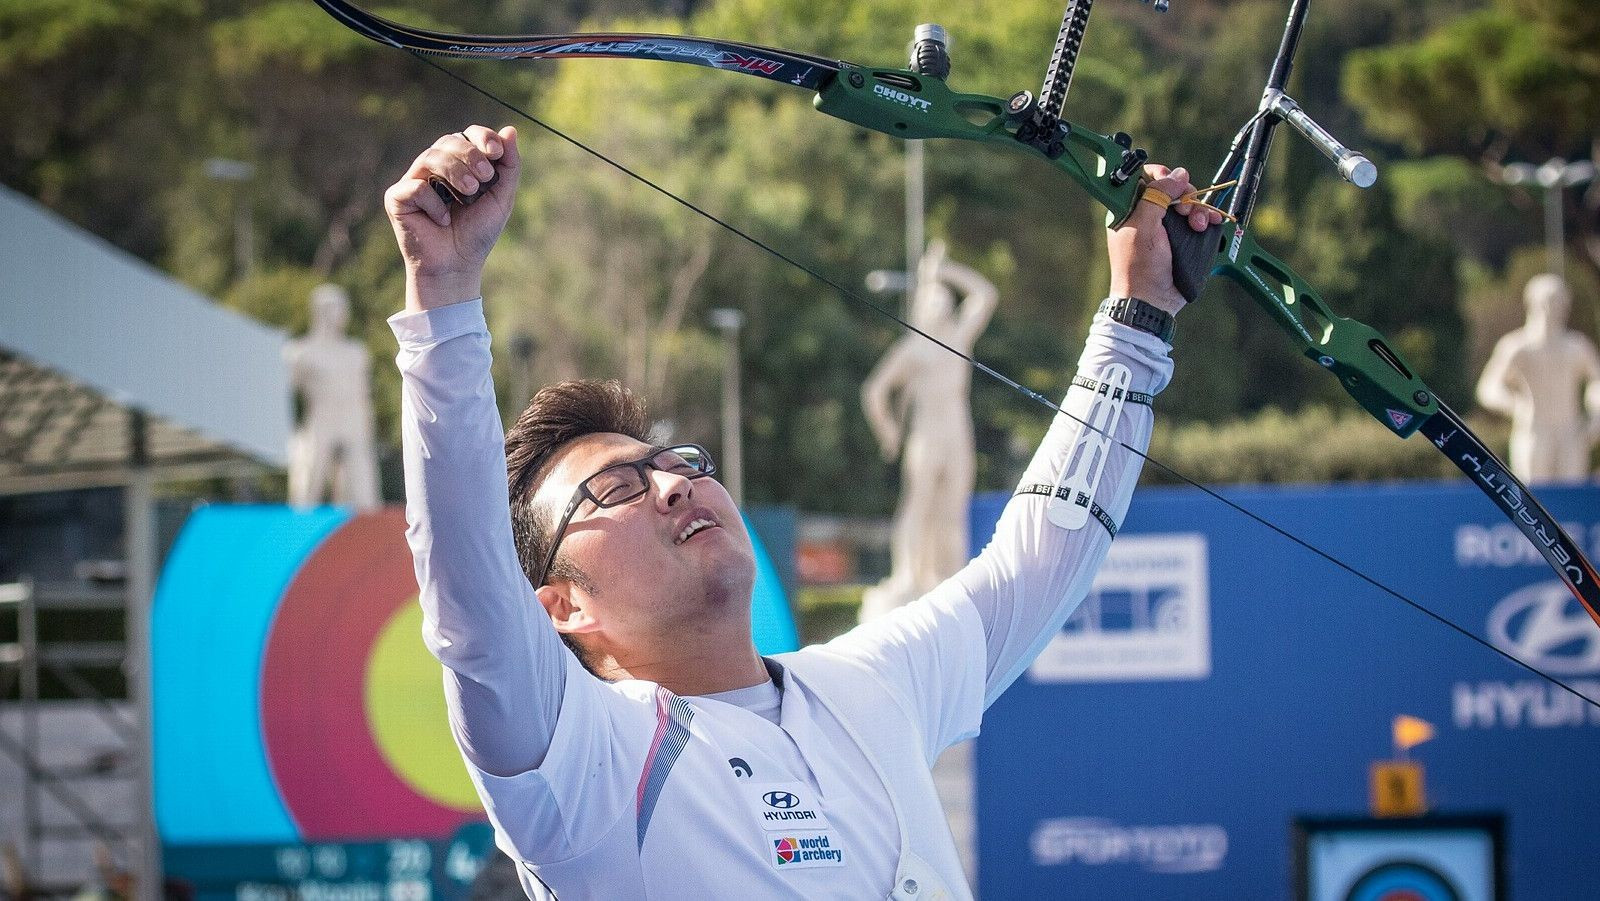 South Korea unbeatable in recurve events at Archery World Cup Final